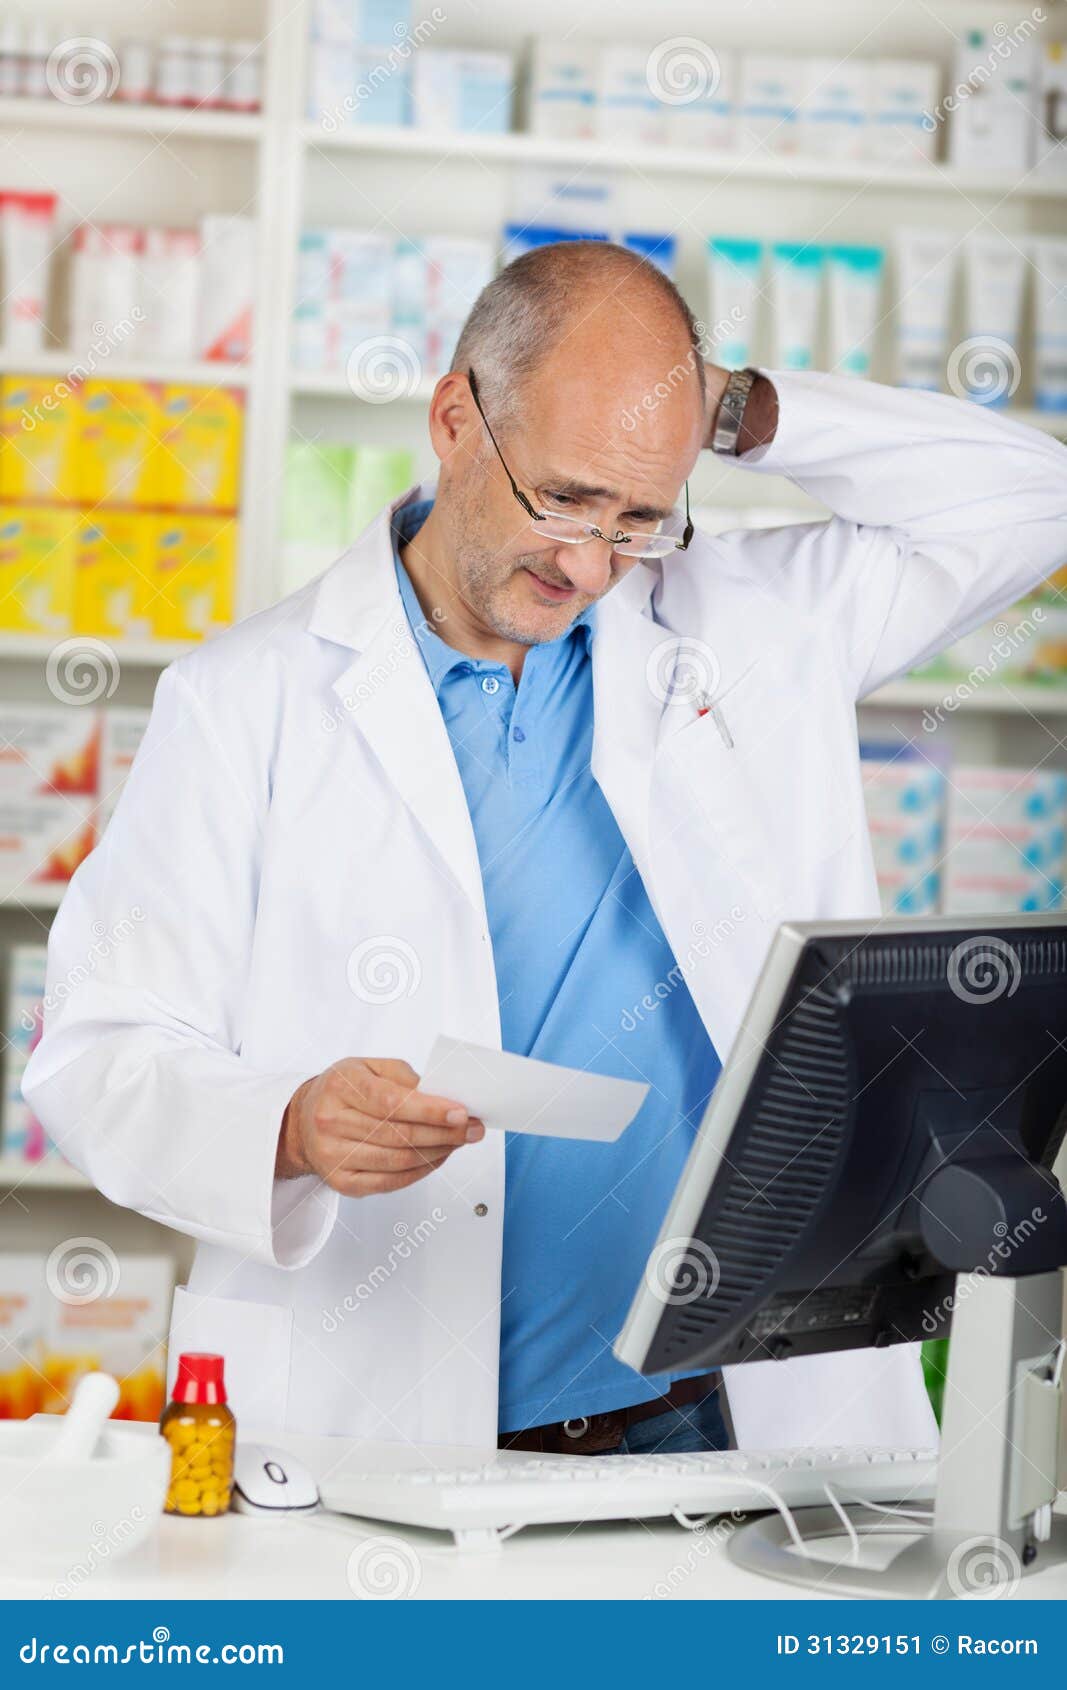 Research papers on pharmacy